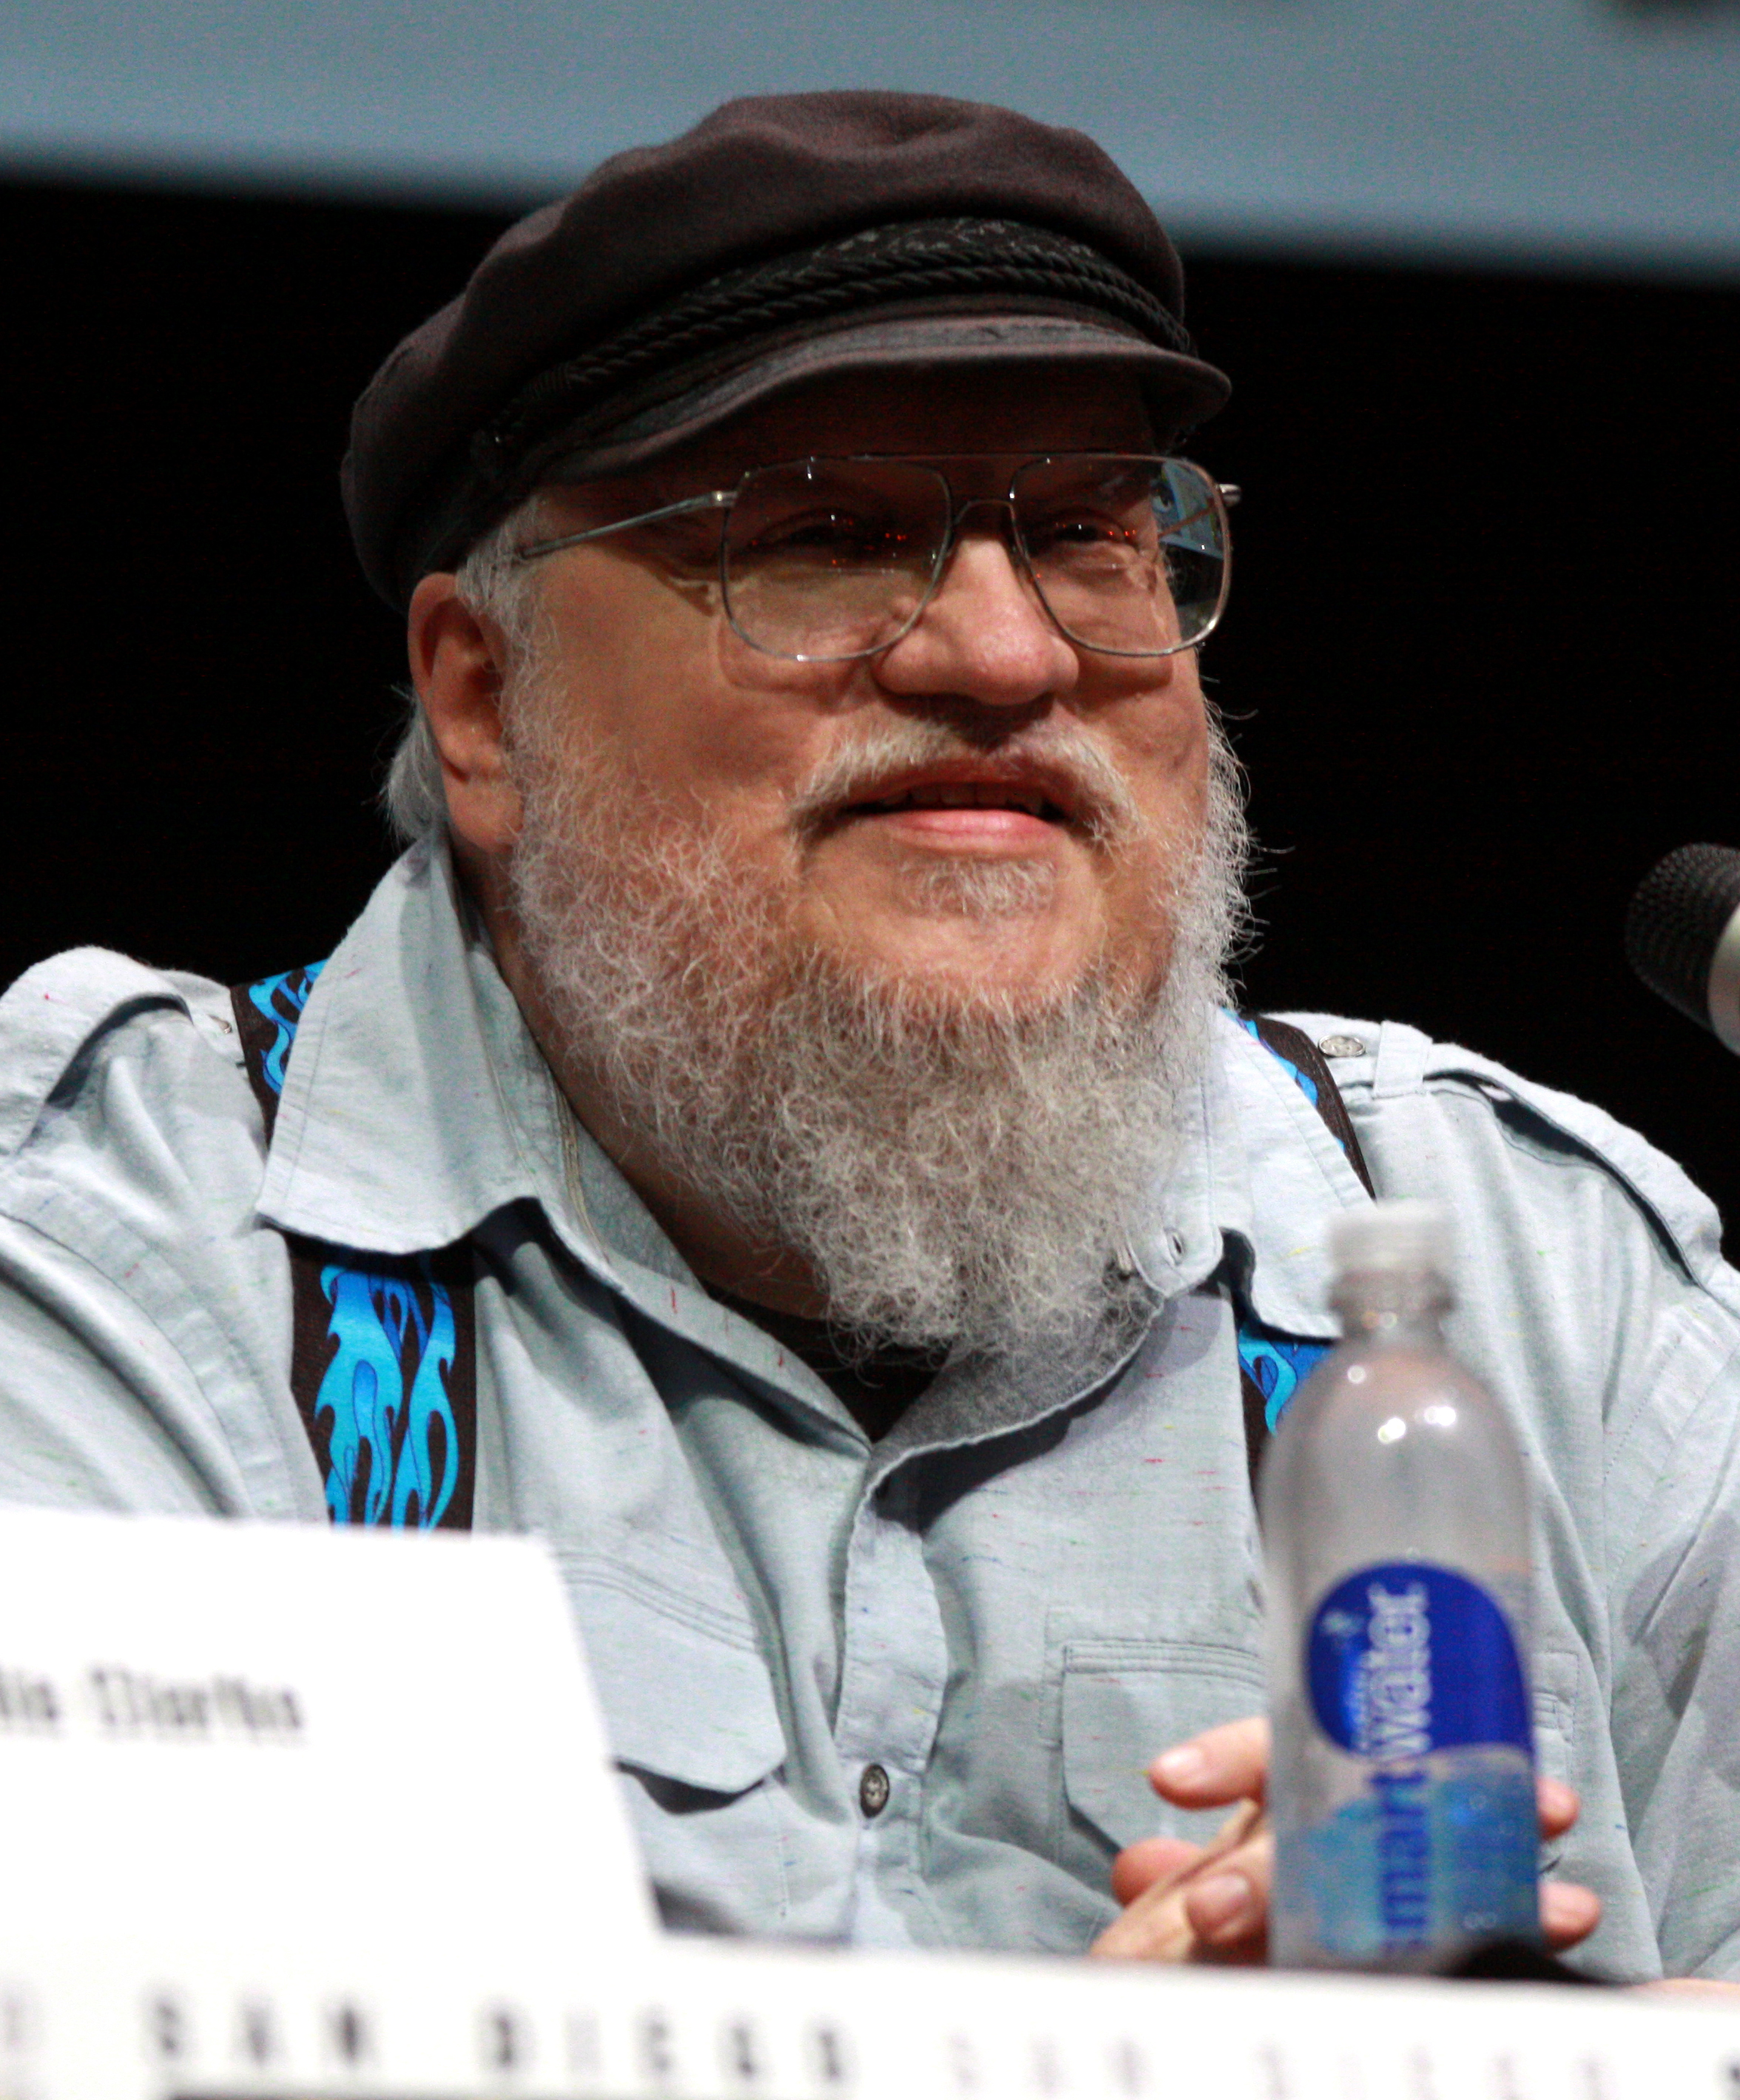 George RR Martin Confirmed Book Launch In January 2017?